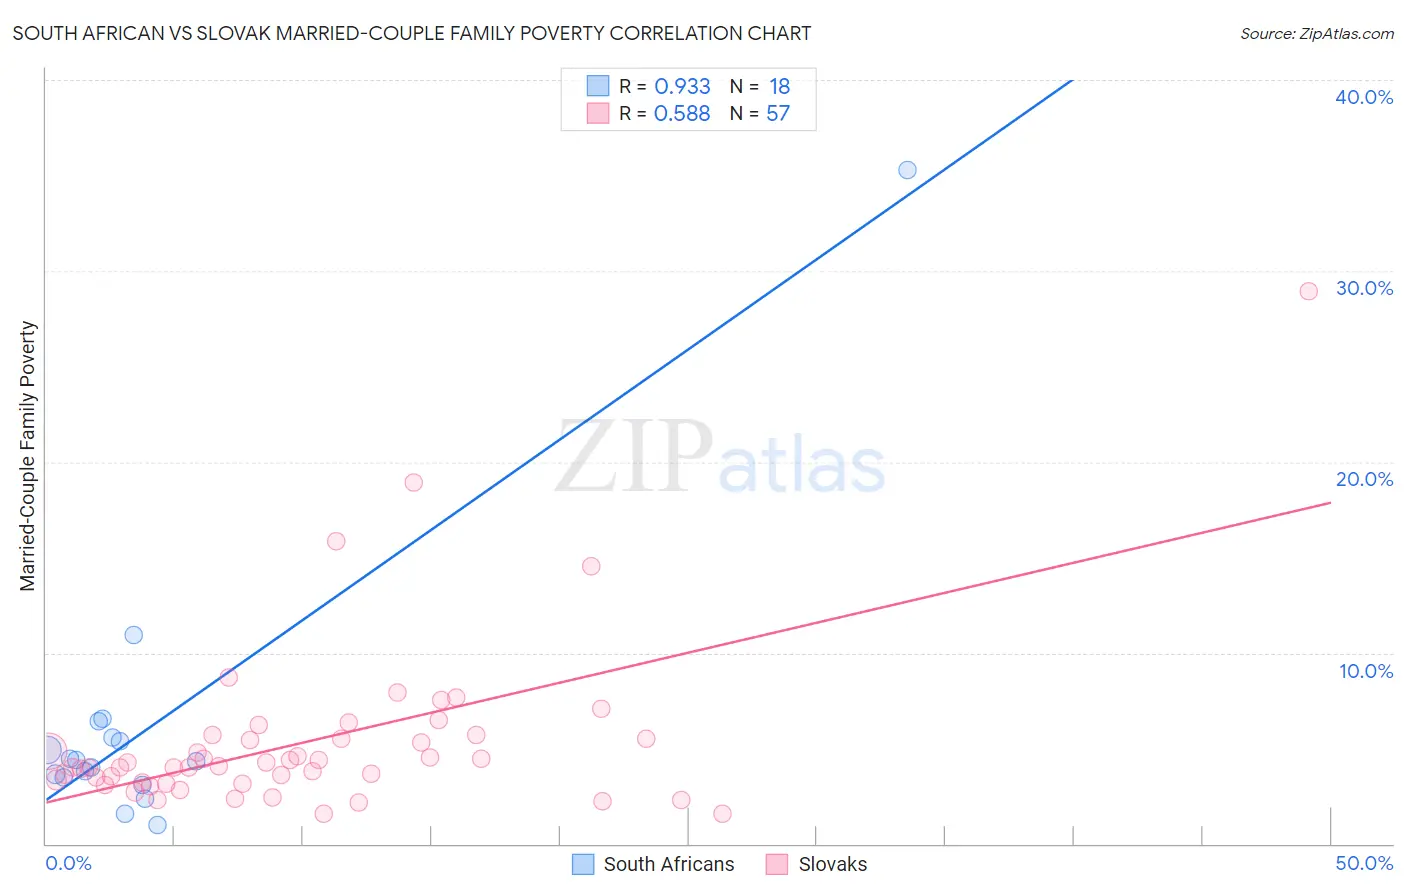 South African vs Slovak Married-Couple Family Poverty